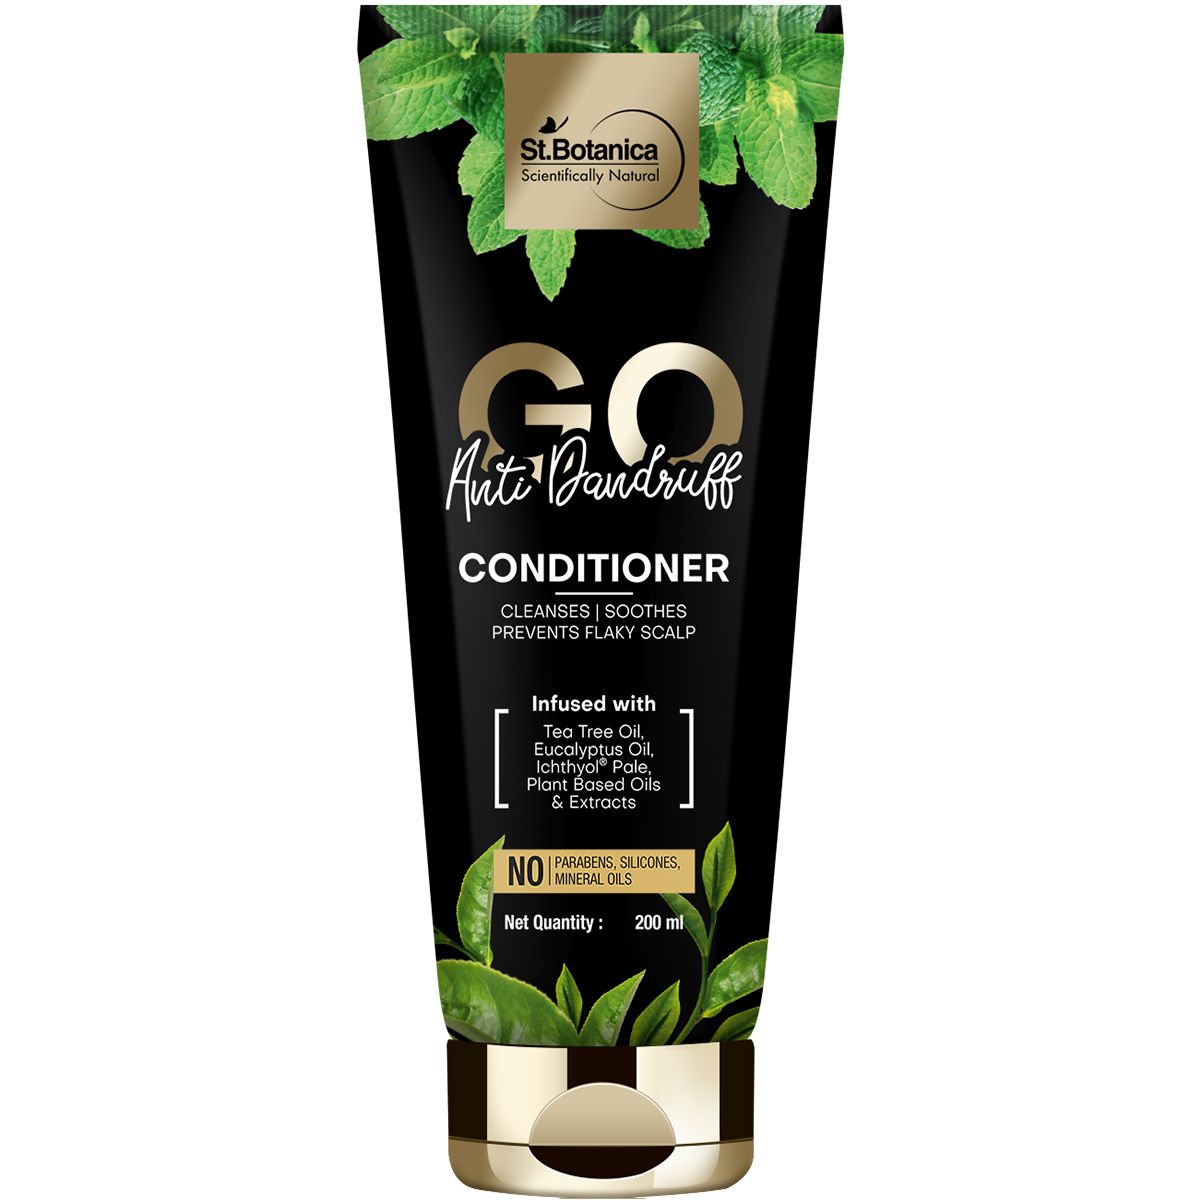 StBotanica GO Anti-Dandruff Hair Conditioner - With Ichthyol Pale, Tea Tree, No Silicone